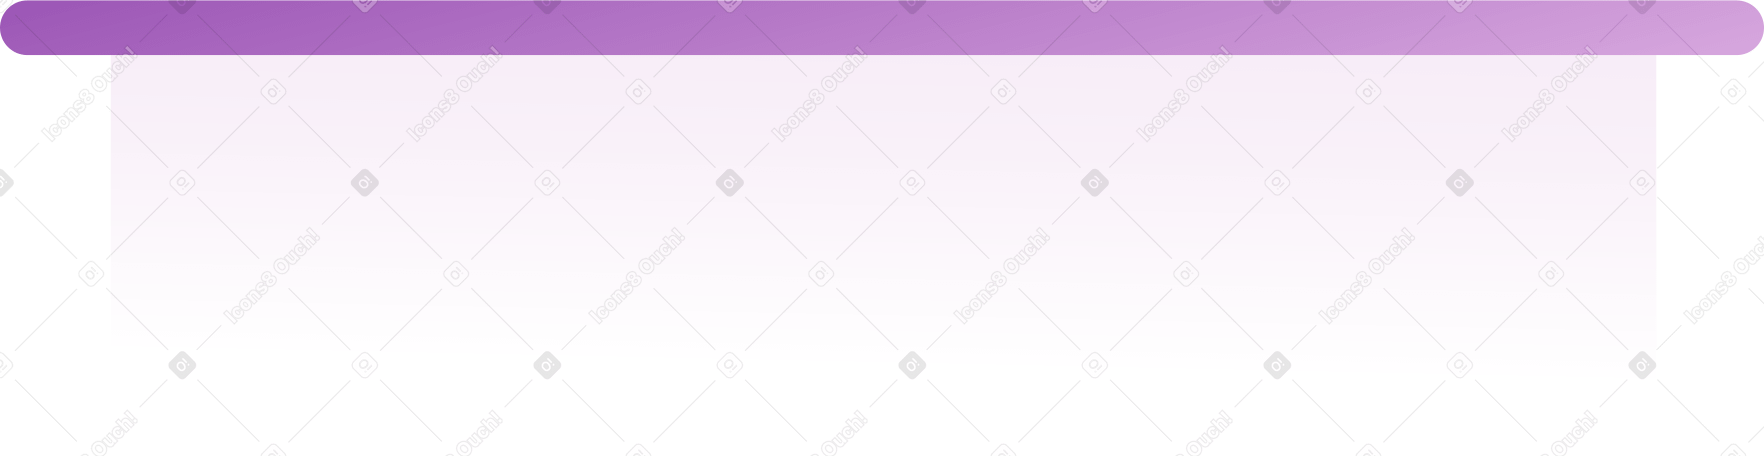 purple table Illustration in PNG, SVG